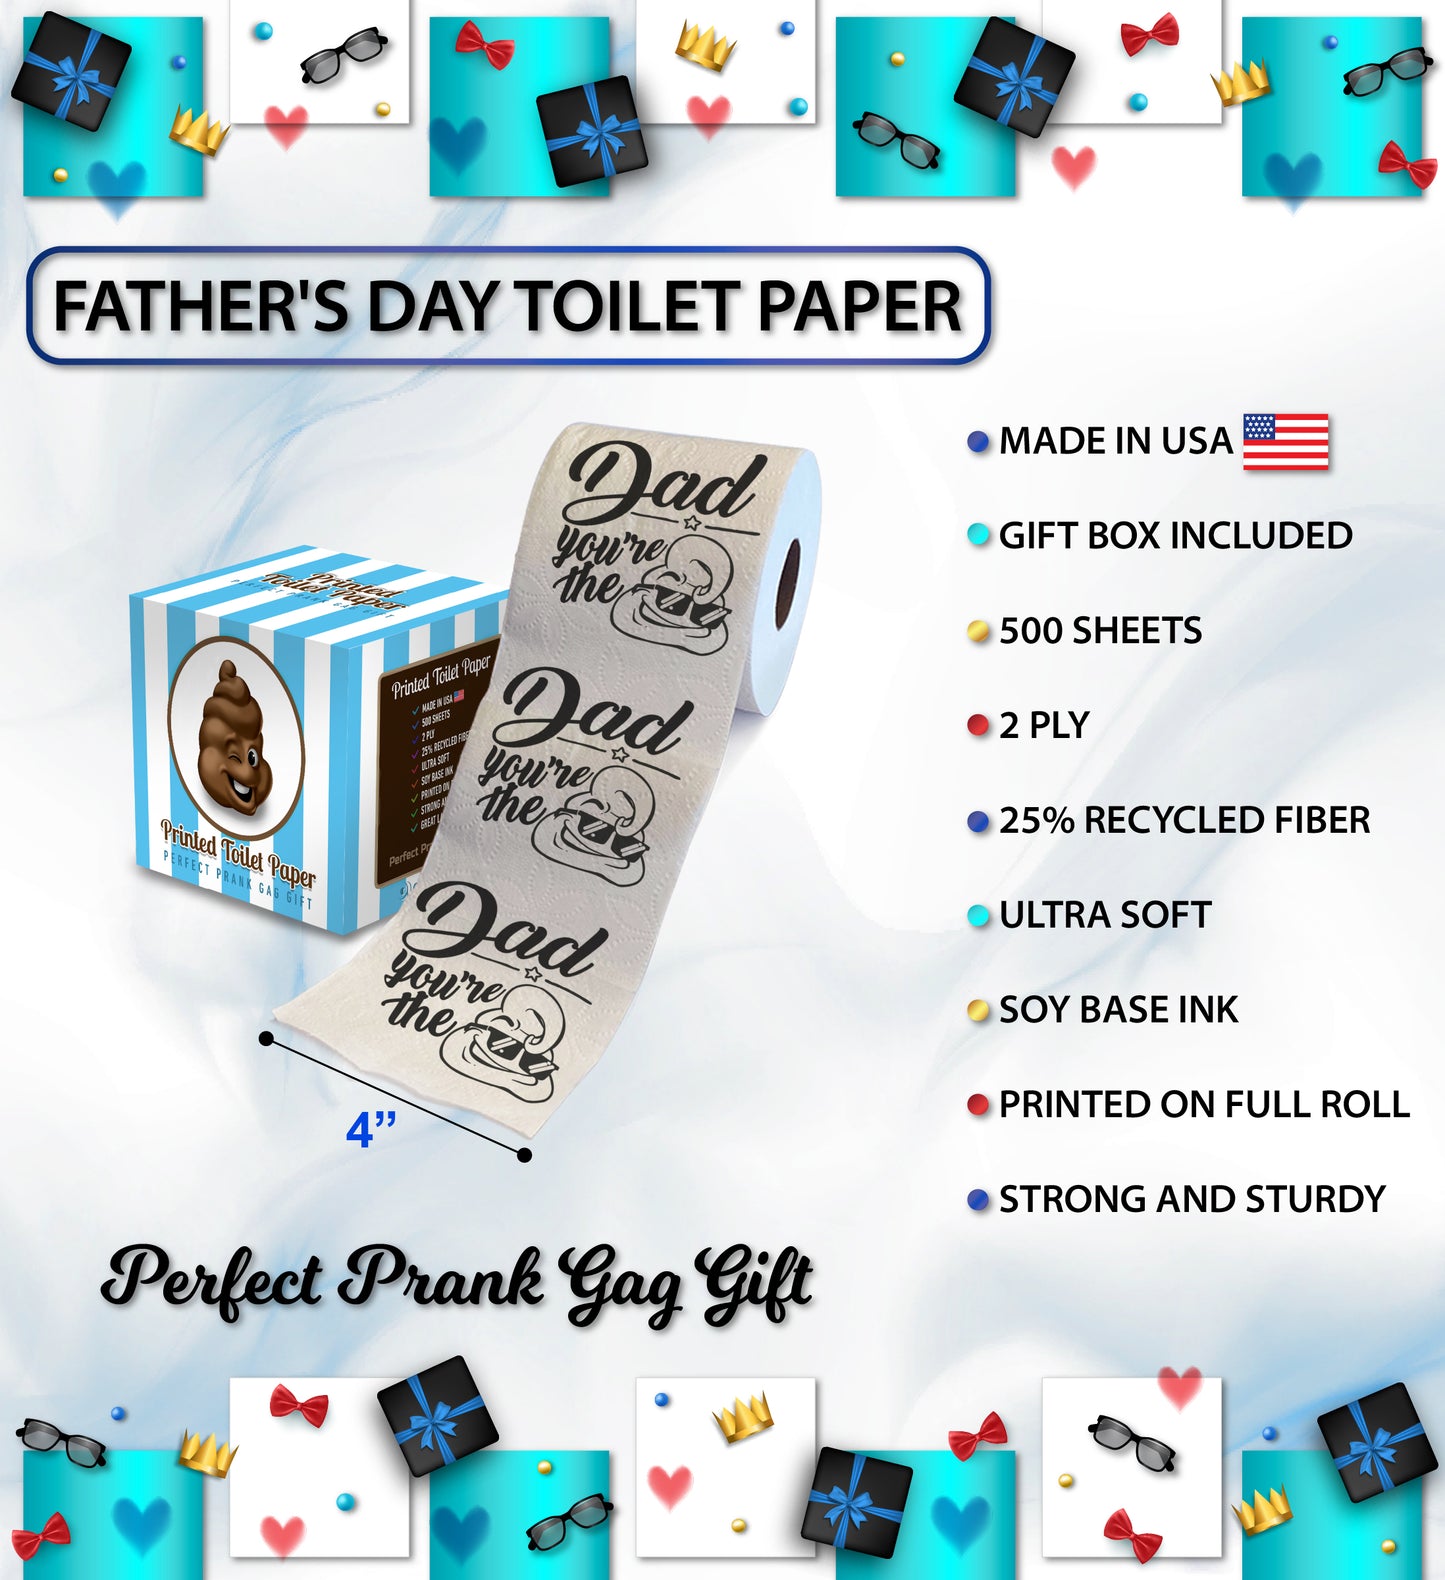 Printed TP Happy Fathers Day Dad You're the Poop Toilet Paper Roll – 500 Sheets